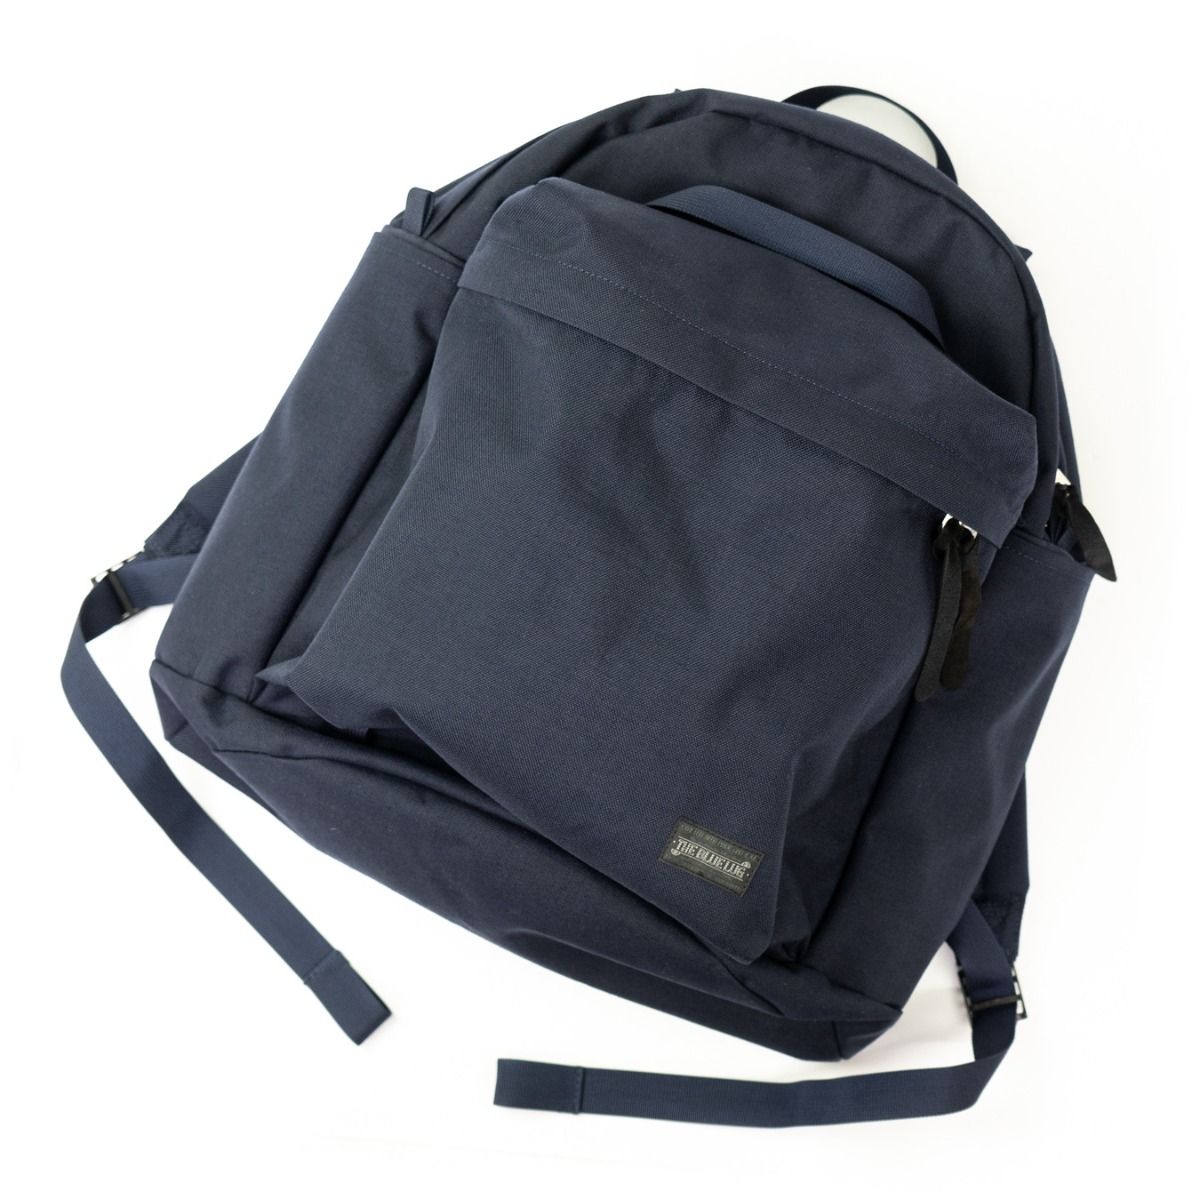 BLUE LUG* THE DAY PACK (all navy) - BLUE LUG ONLINE STORE